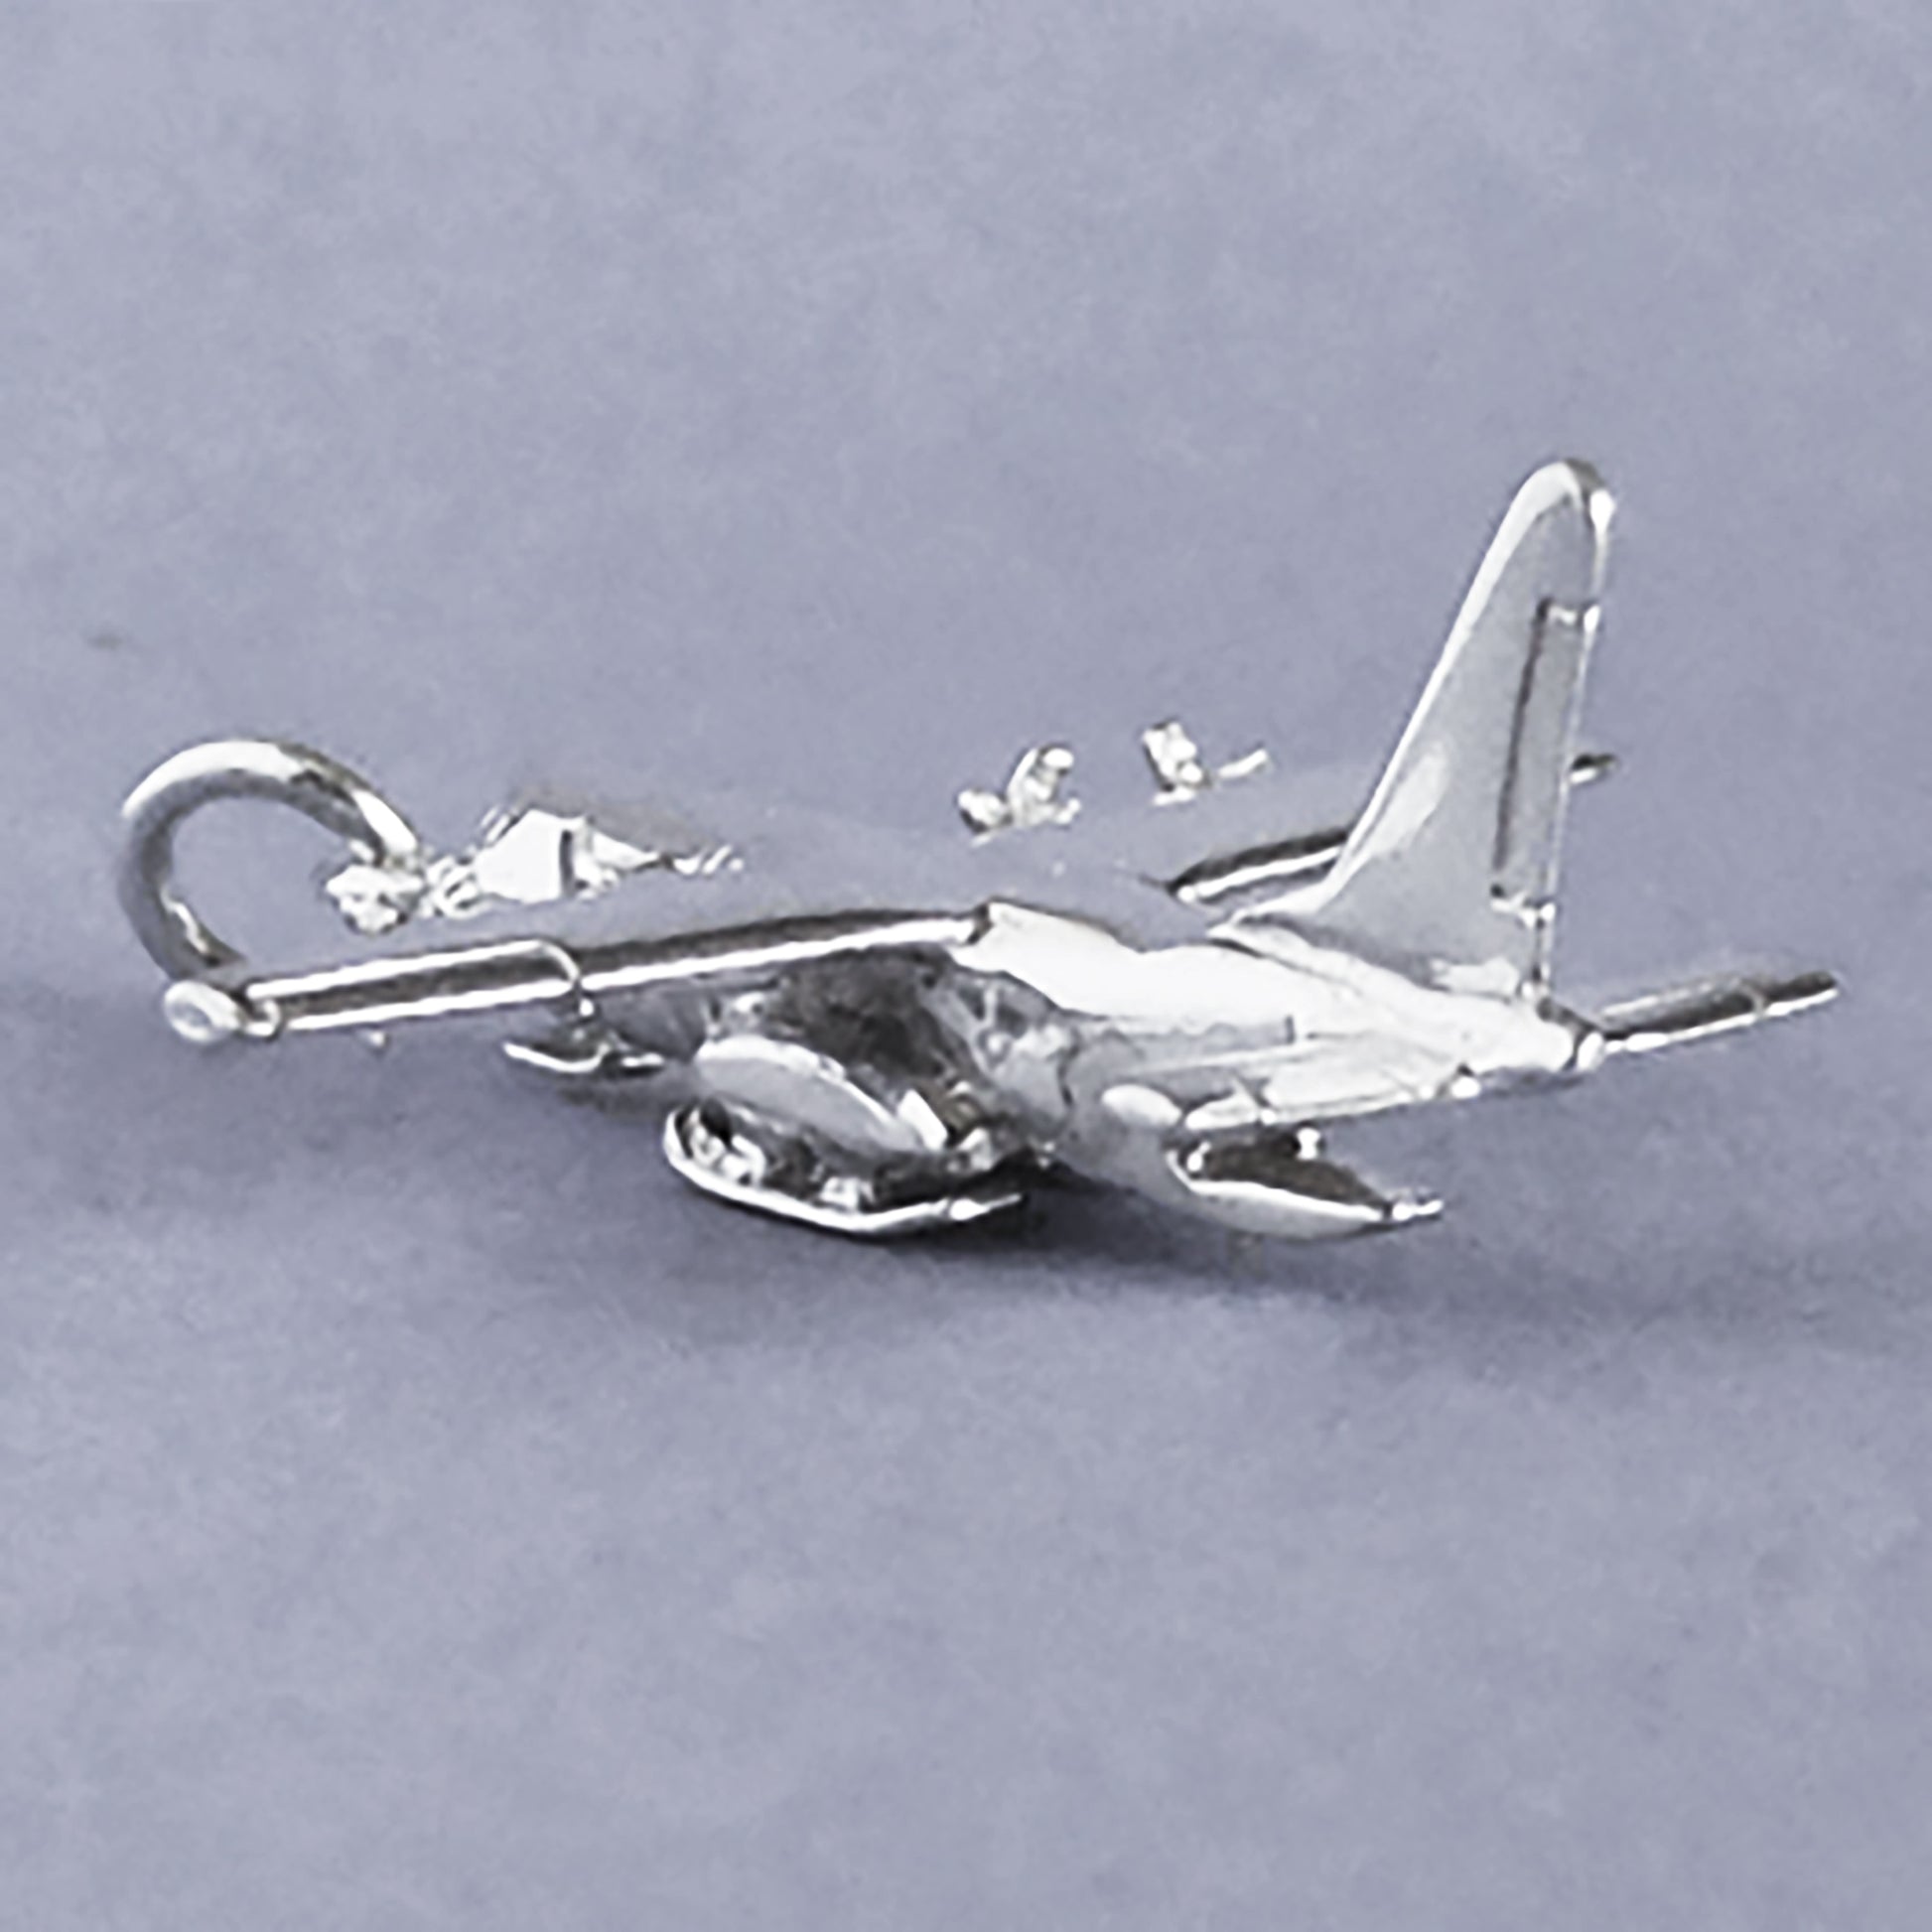 Hercules Ski Plane Aircraft Charm Sterling Silver or Gold Pendant